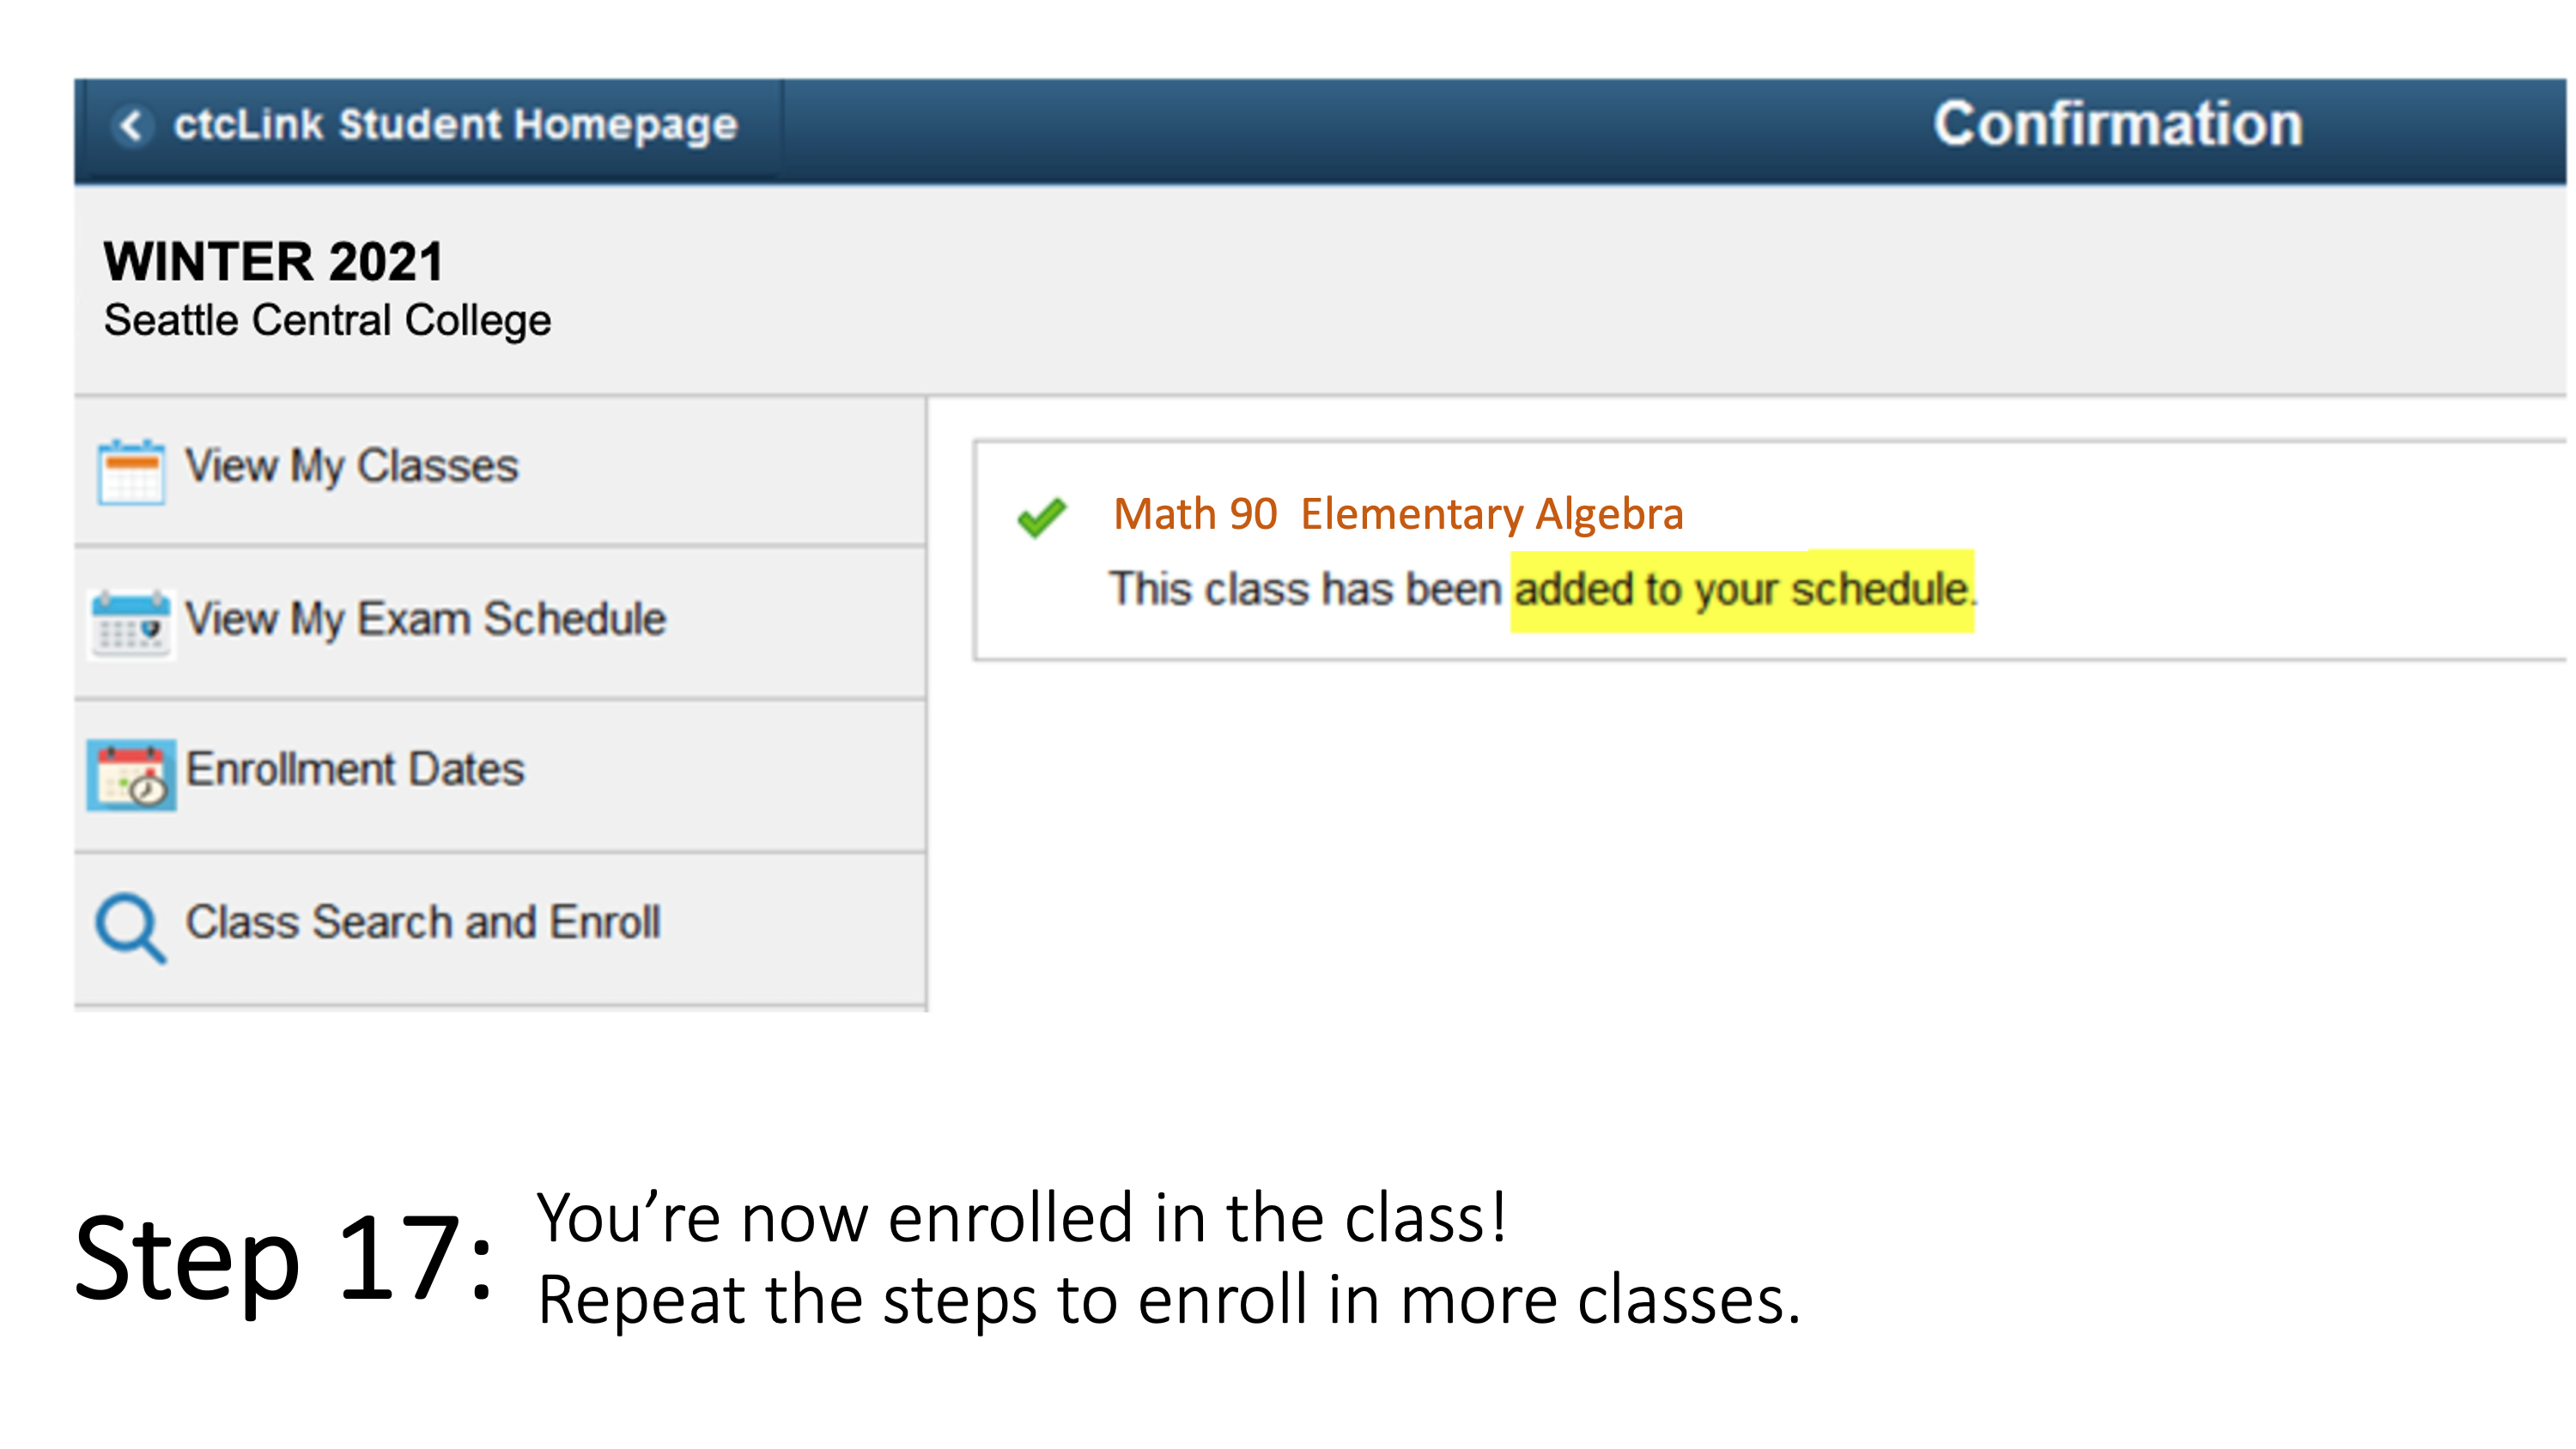 You’re now enrolled in the class! Repeat the steps to enroll in more classes.